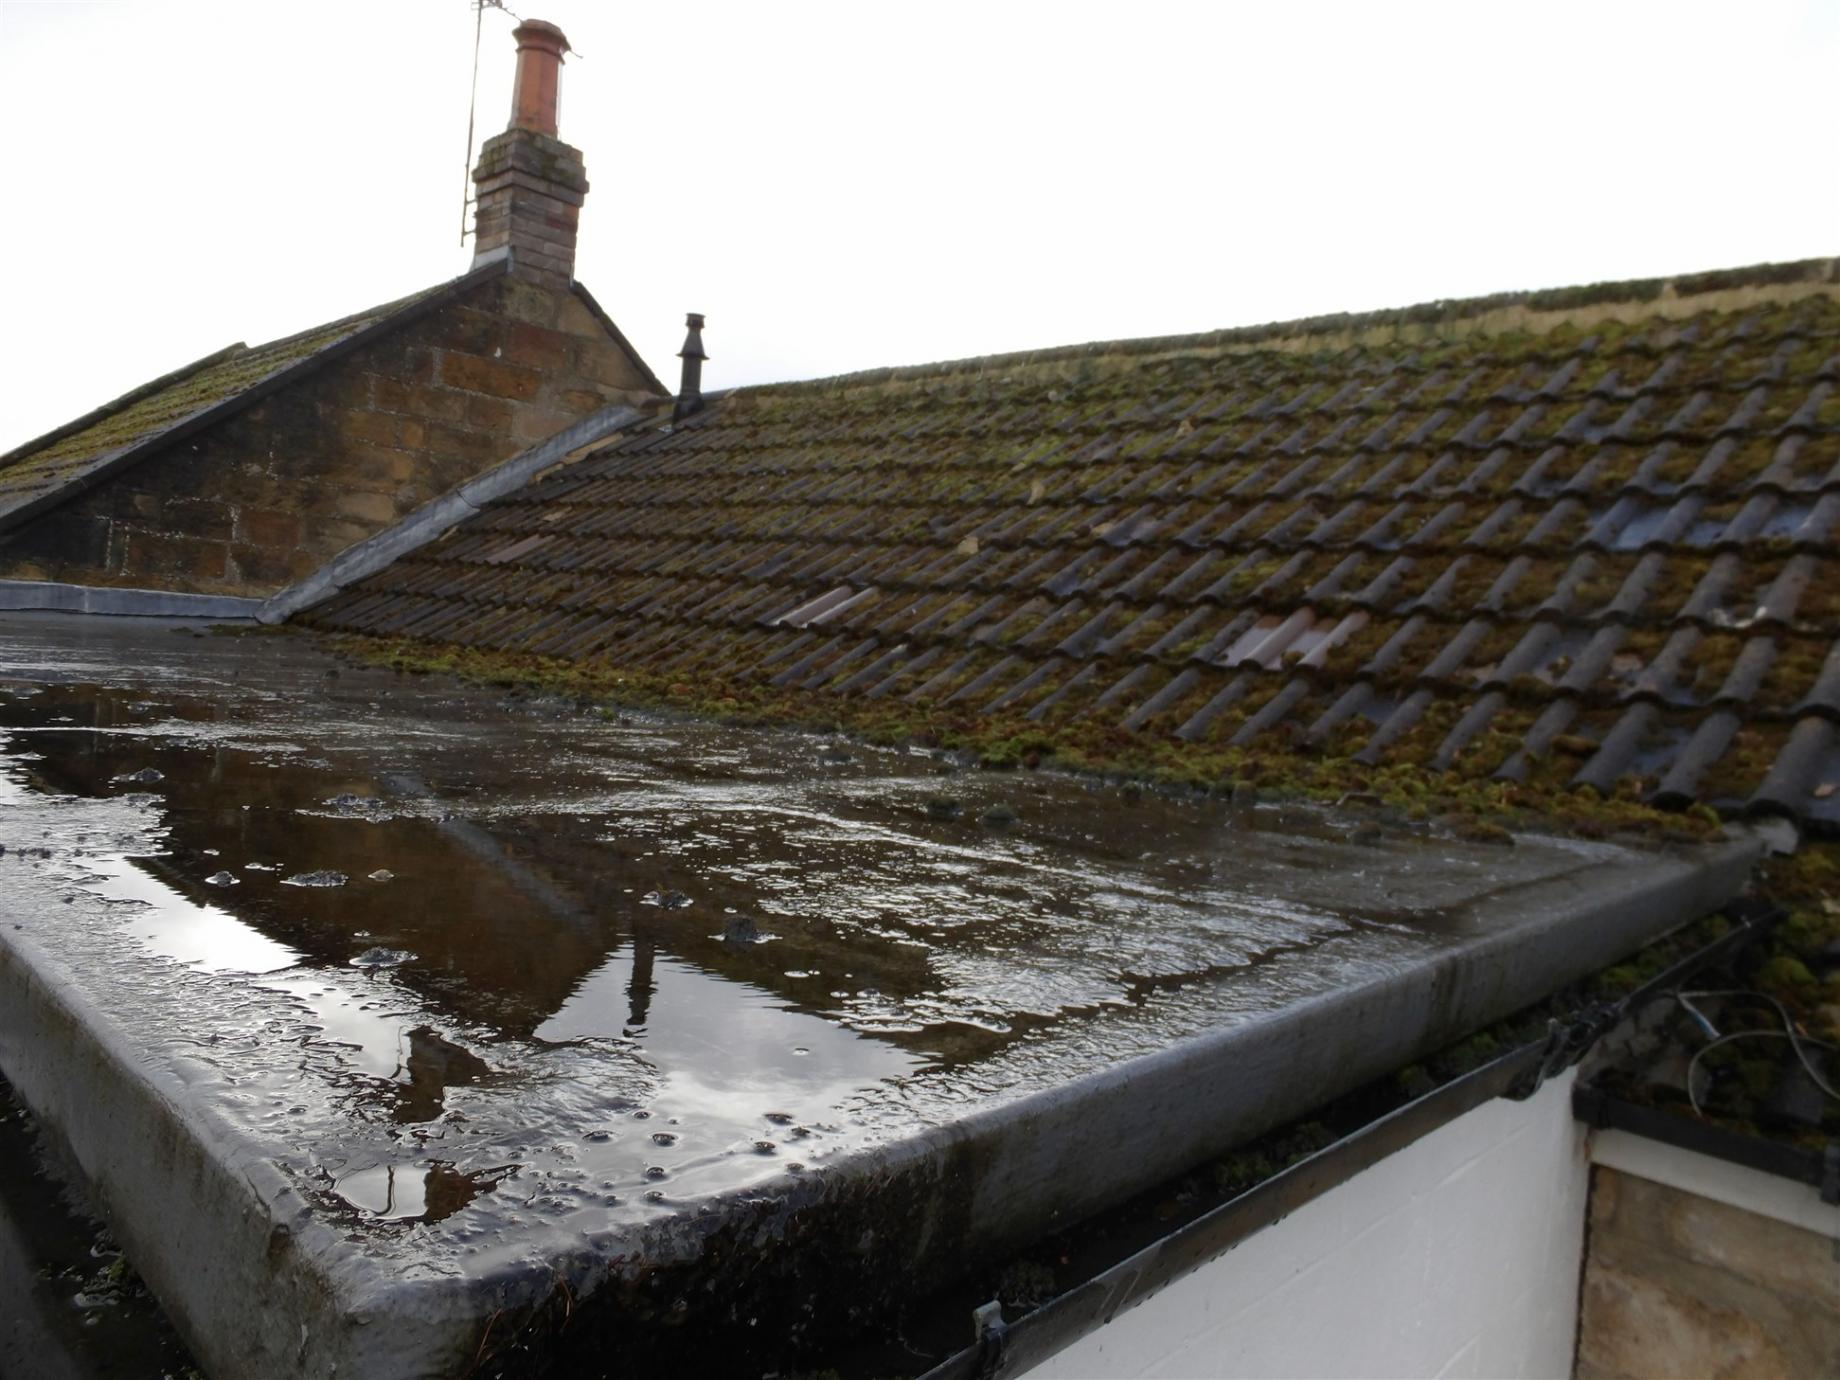 Standing water on a flat roof will enhance its deterioration and shorten its life.